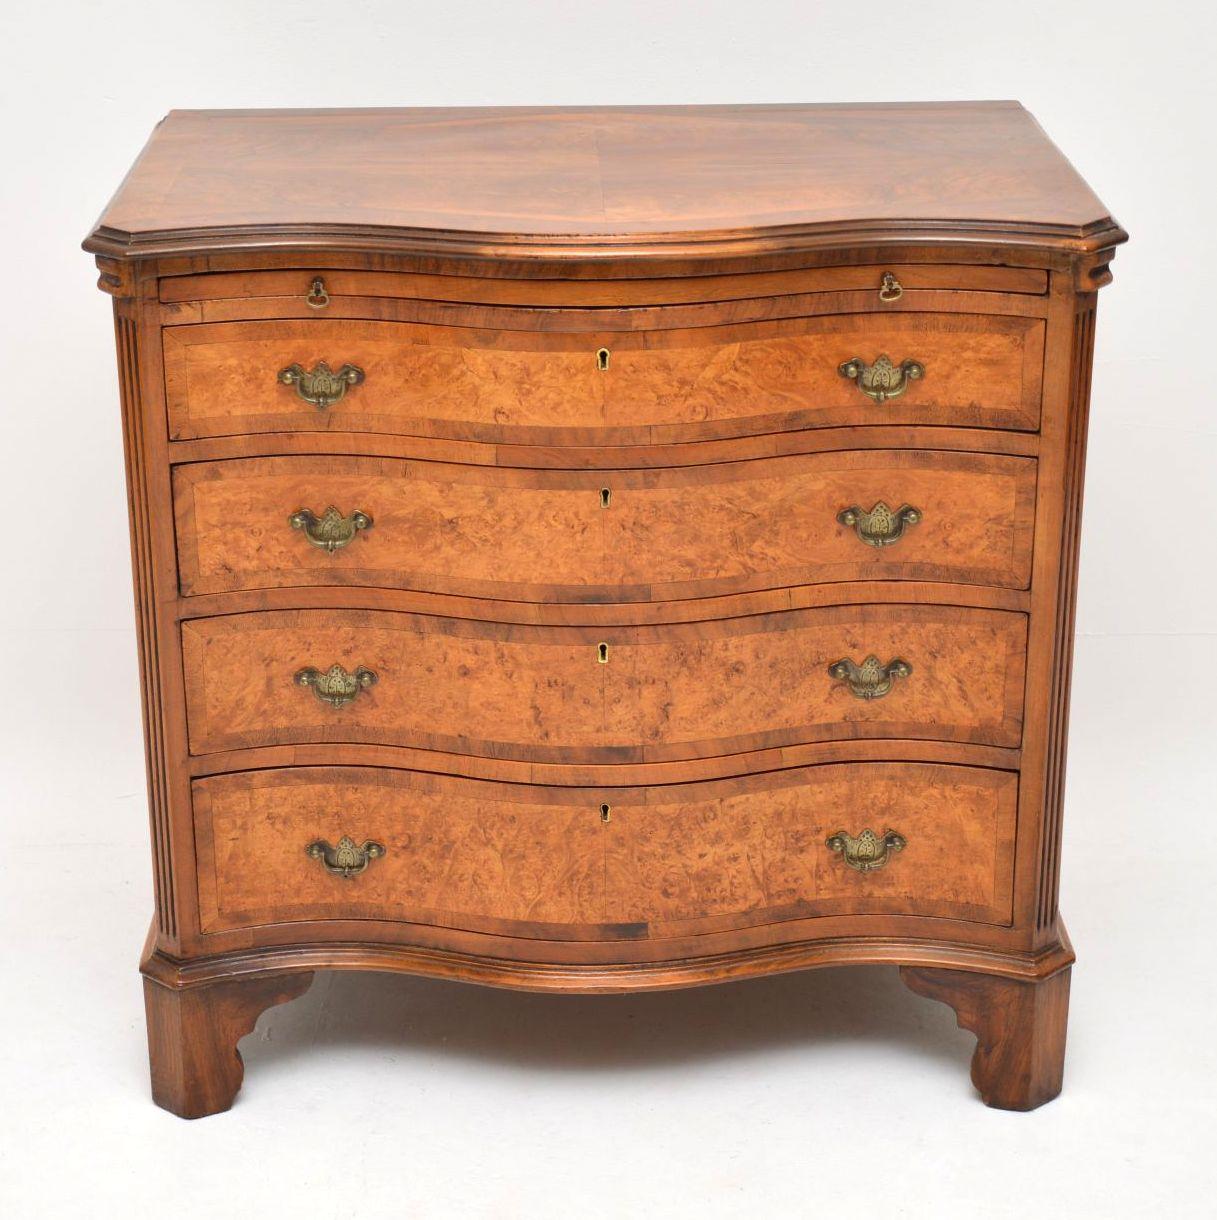 This antique burr walnut serpentine fronted chest of drawers is extremely high quality & has lovely proportions, plus a wonderful mellow color. It’s in very good original condition, having just been French polished & I would date it to around the